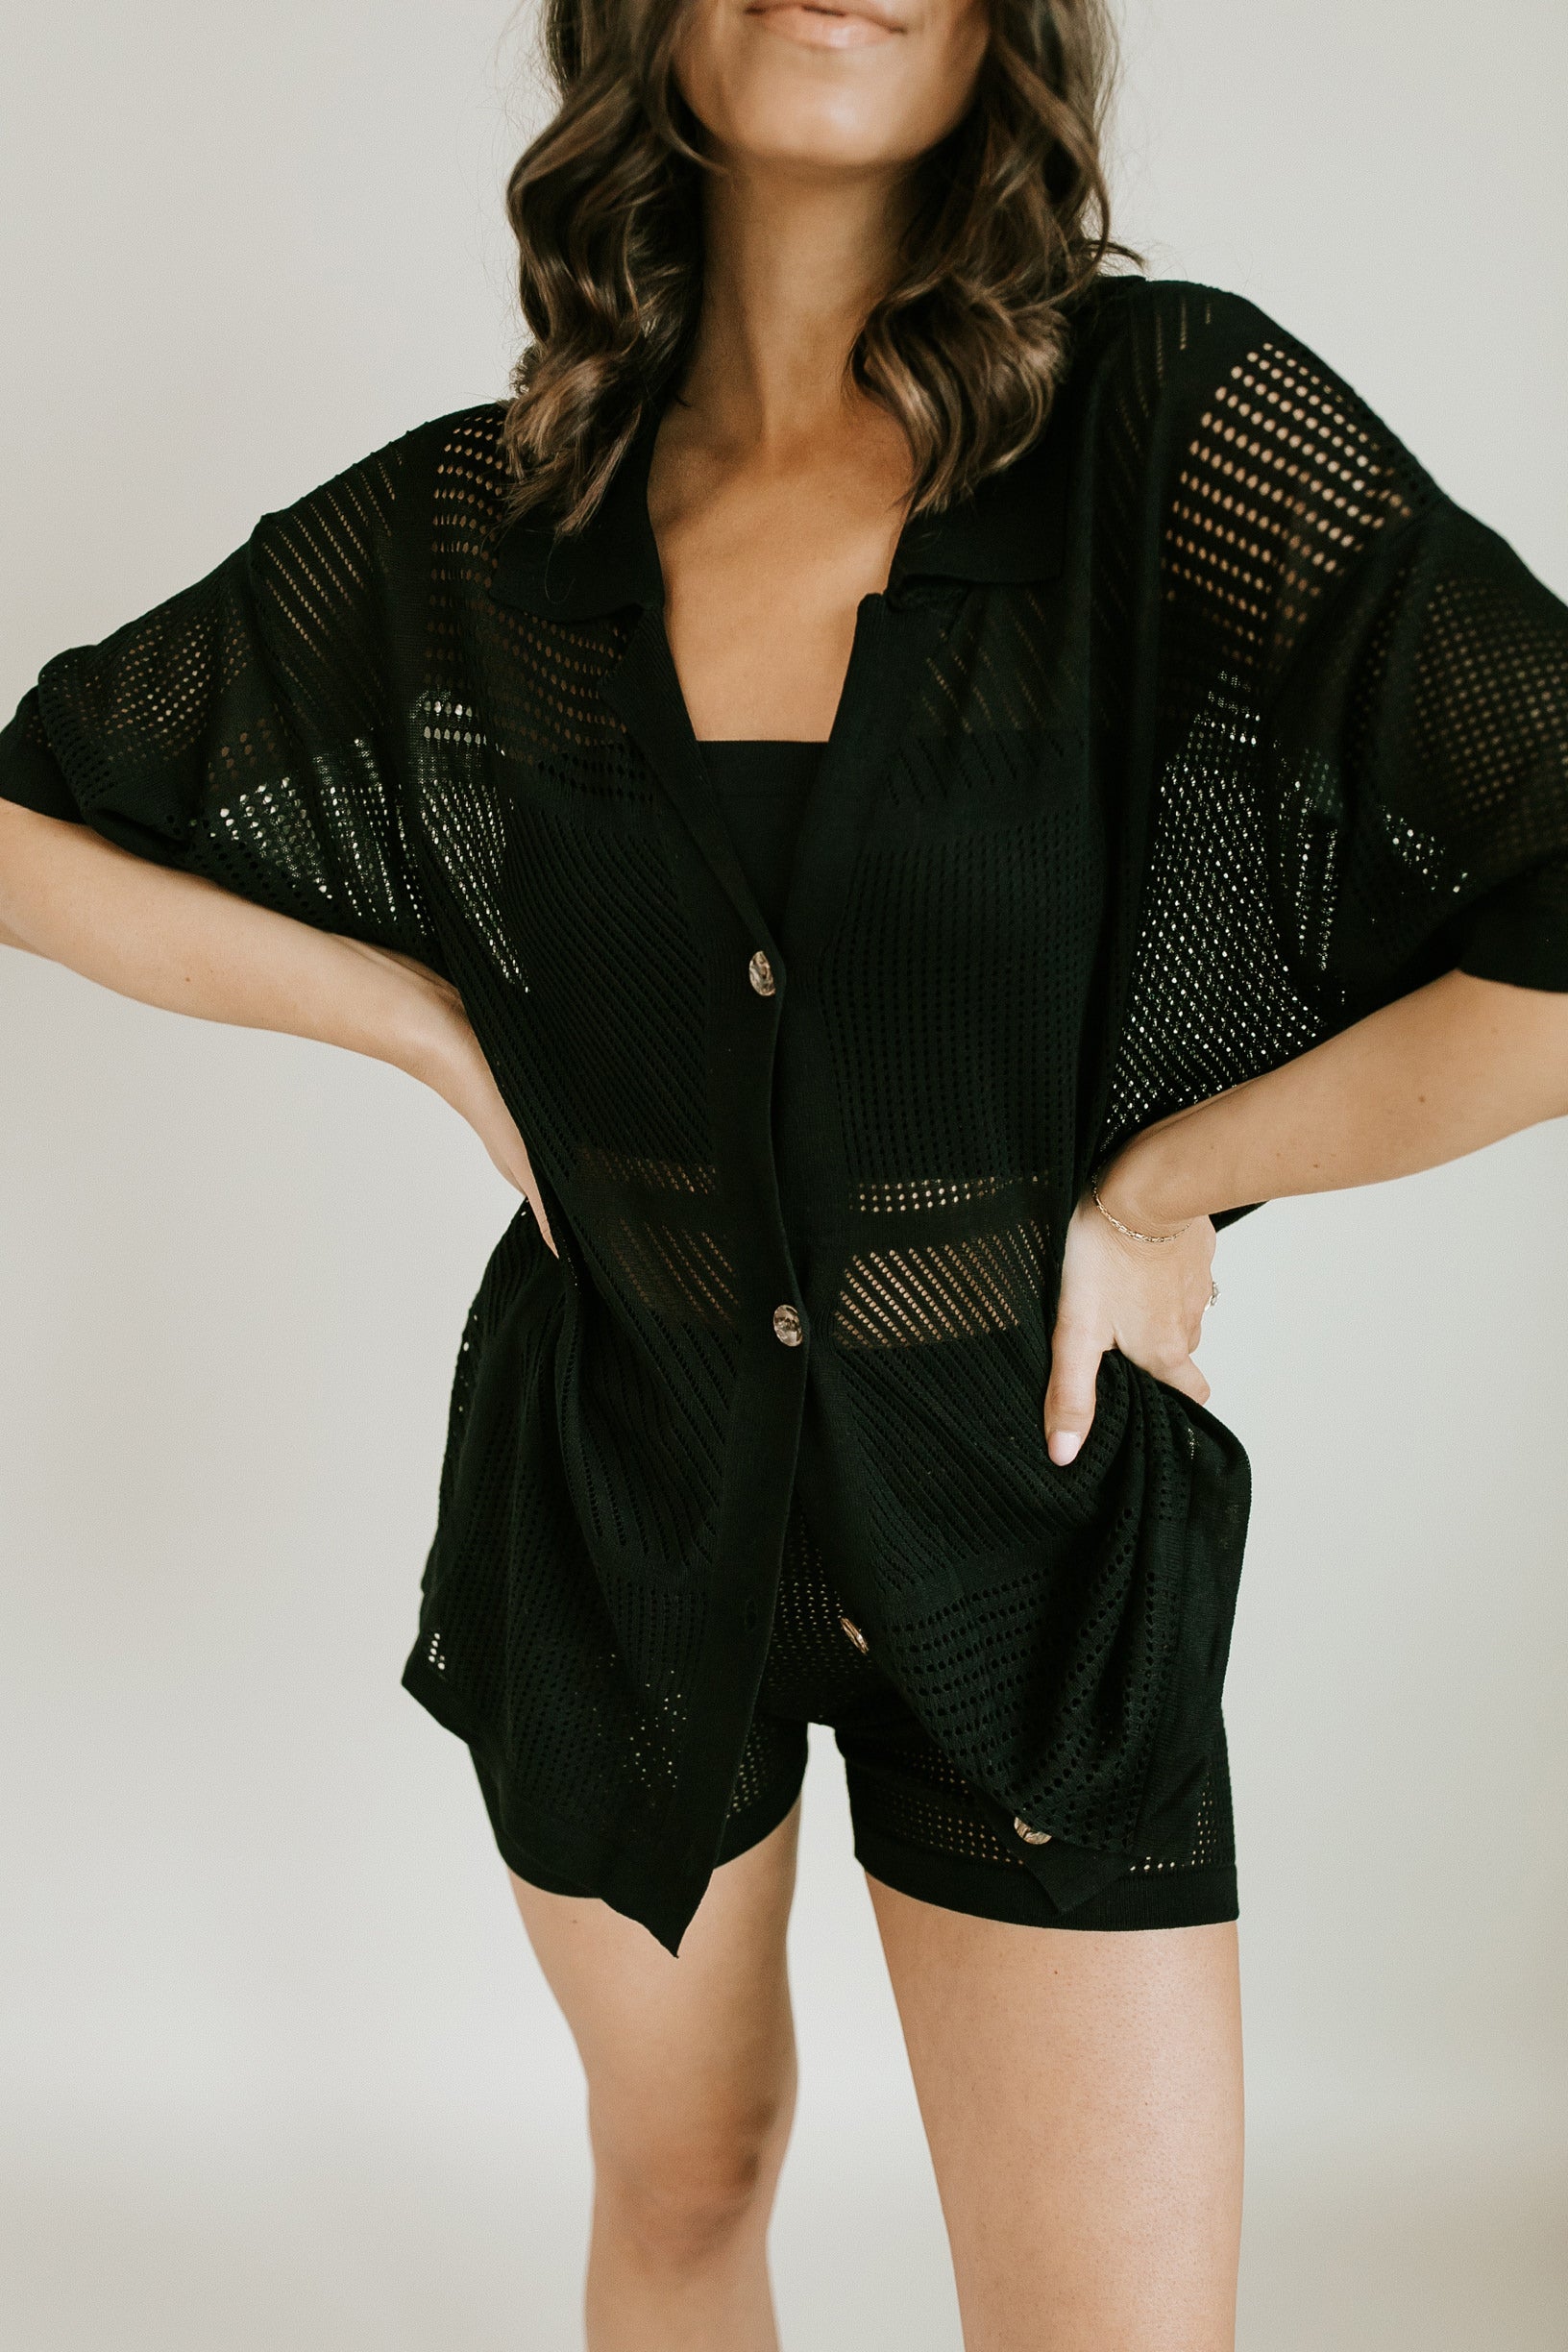 Feel The Breeze Button Front Top + Shorts Set - Black